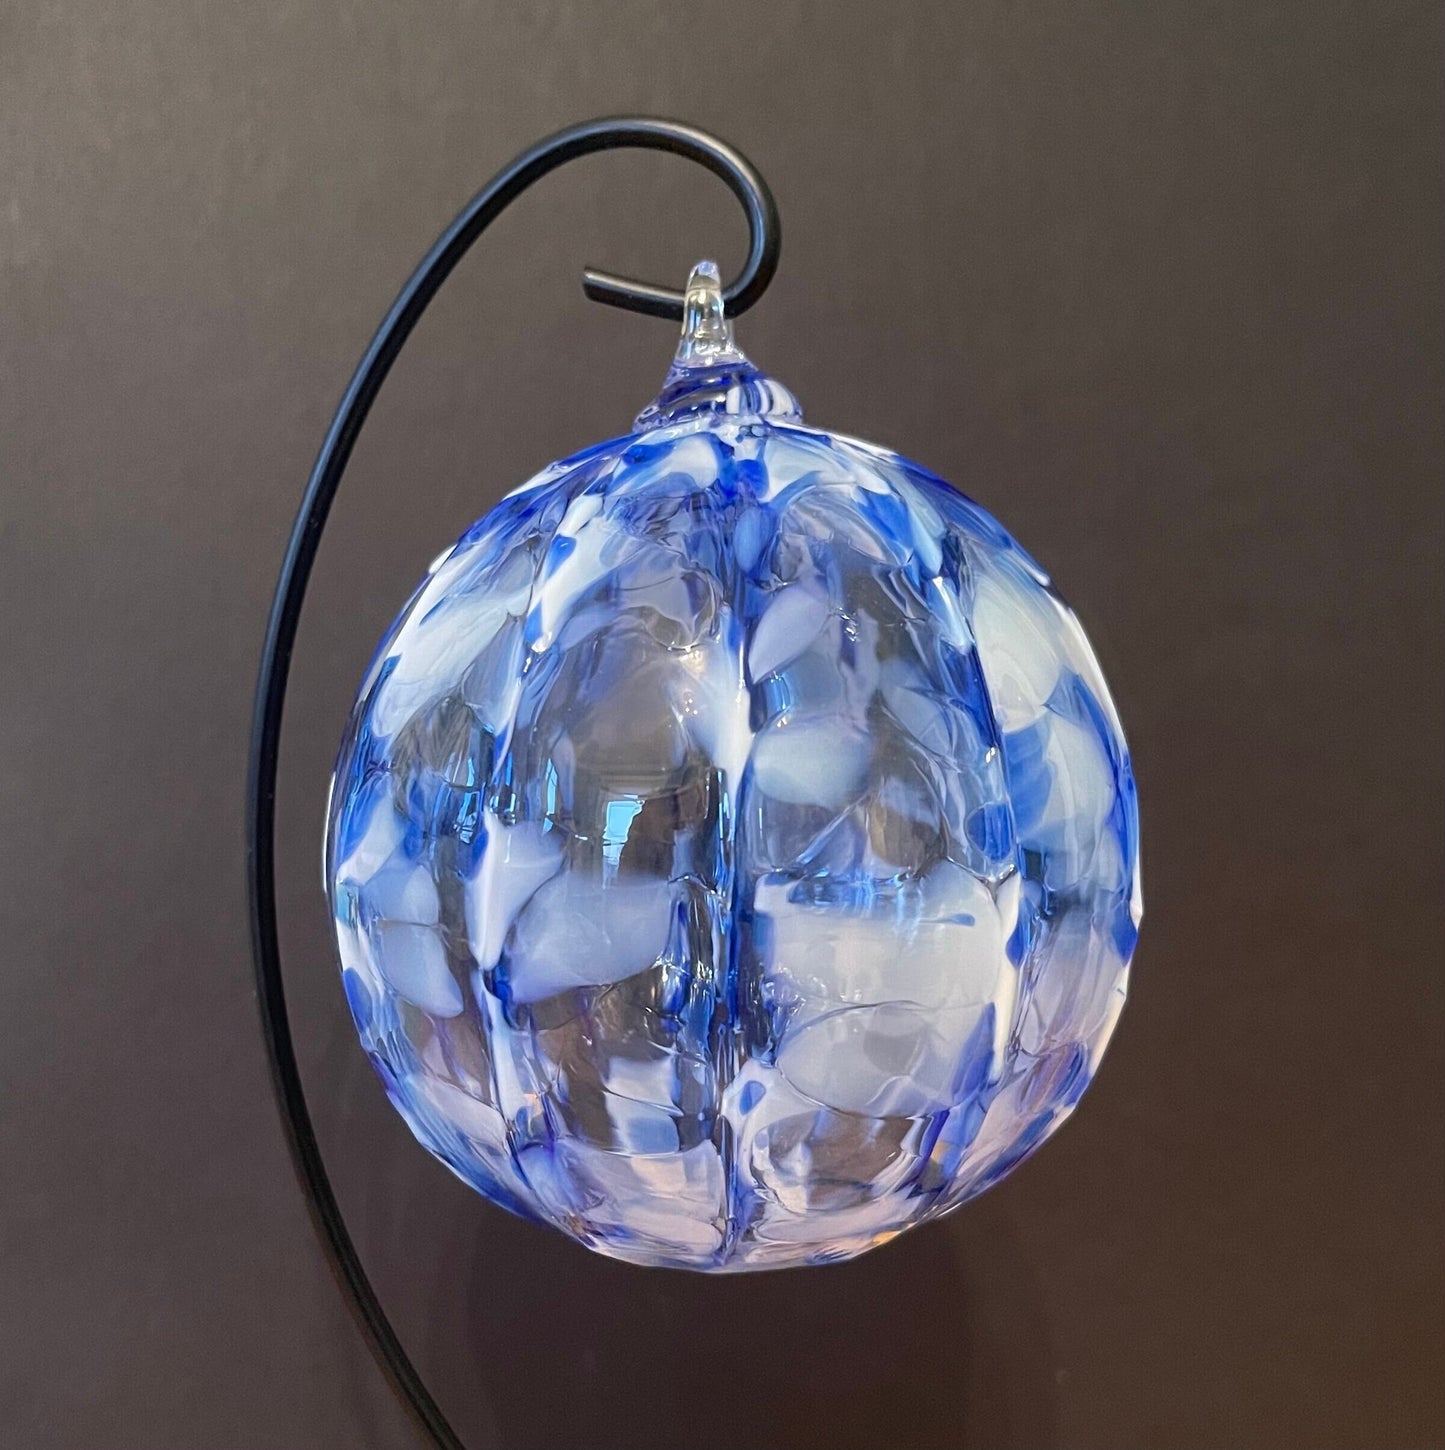 Hand Crafted Ornament Blue Mix by Boise Art Glass